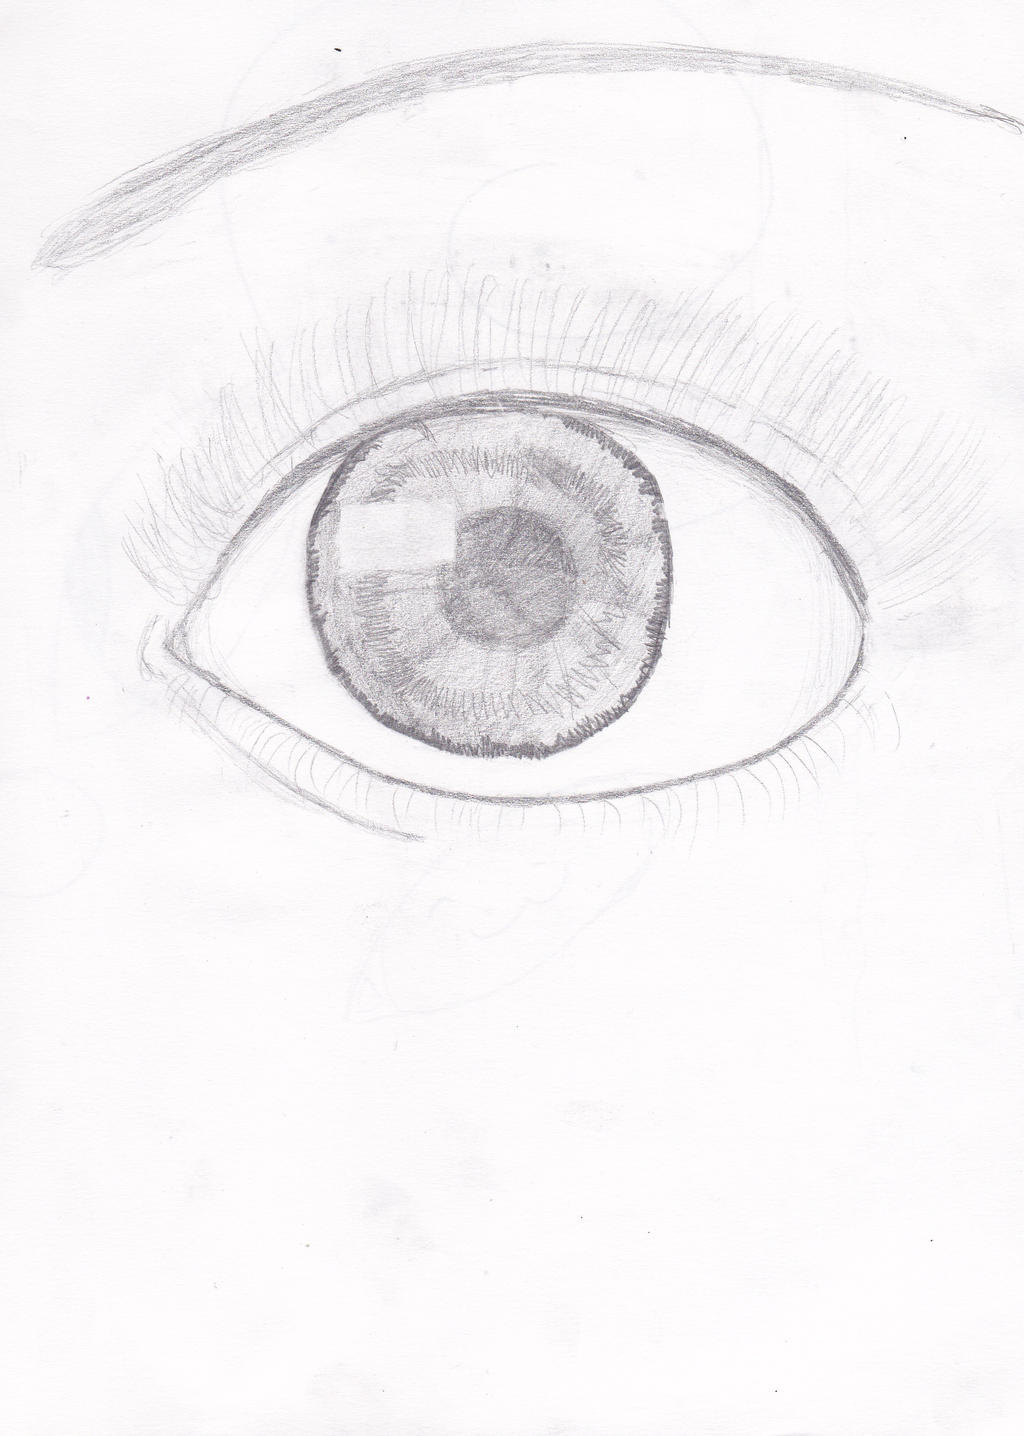 Attempt at A Realistic Eye